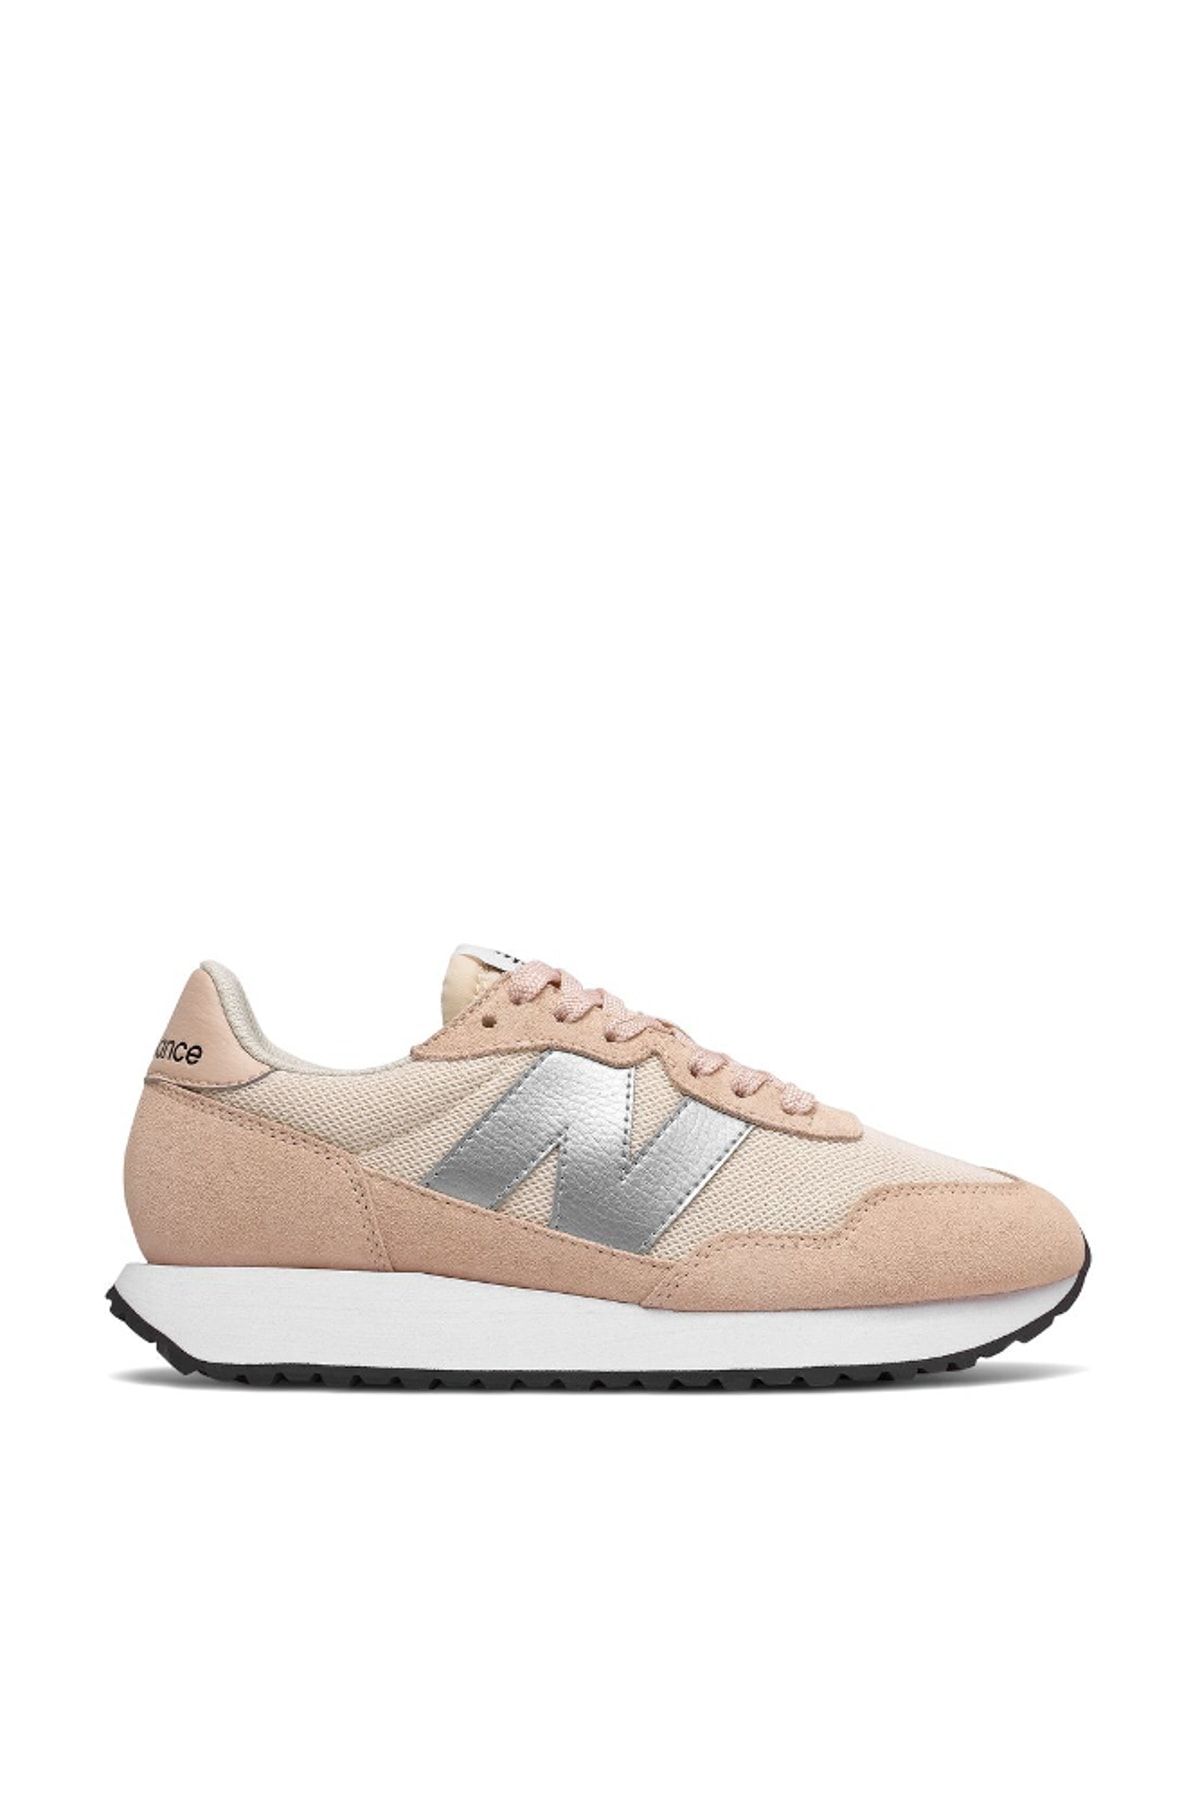 New Balance WS237CA.692 NB Lifestyle Womens Shoes